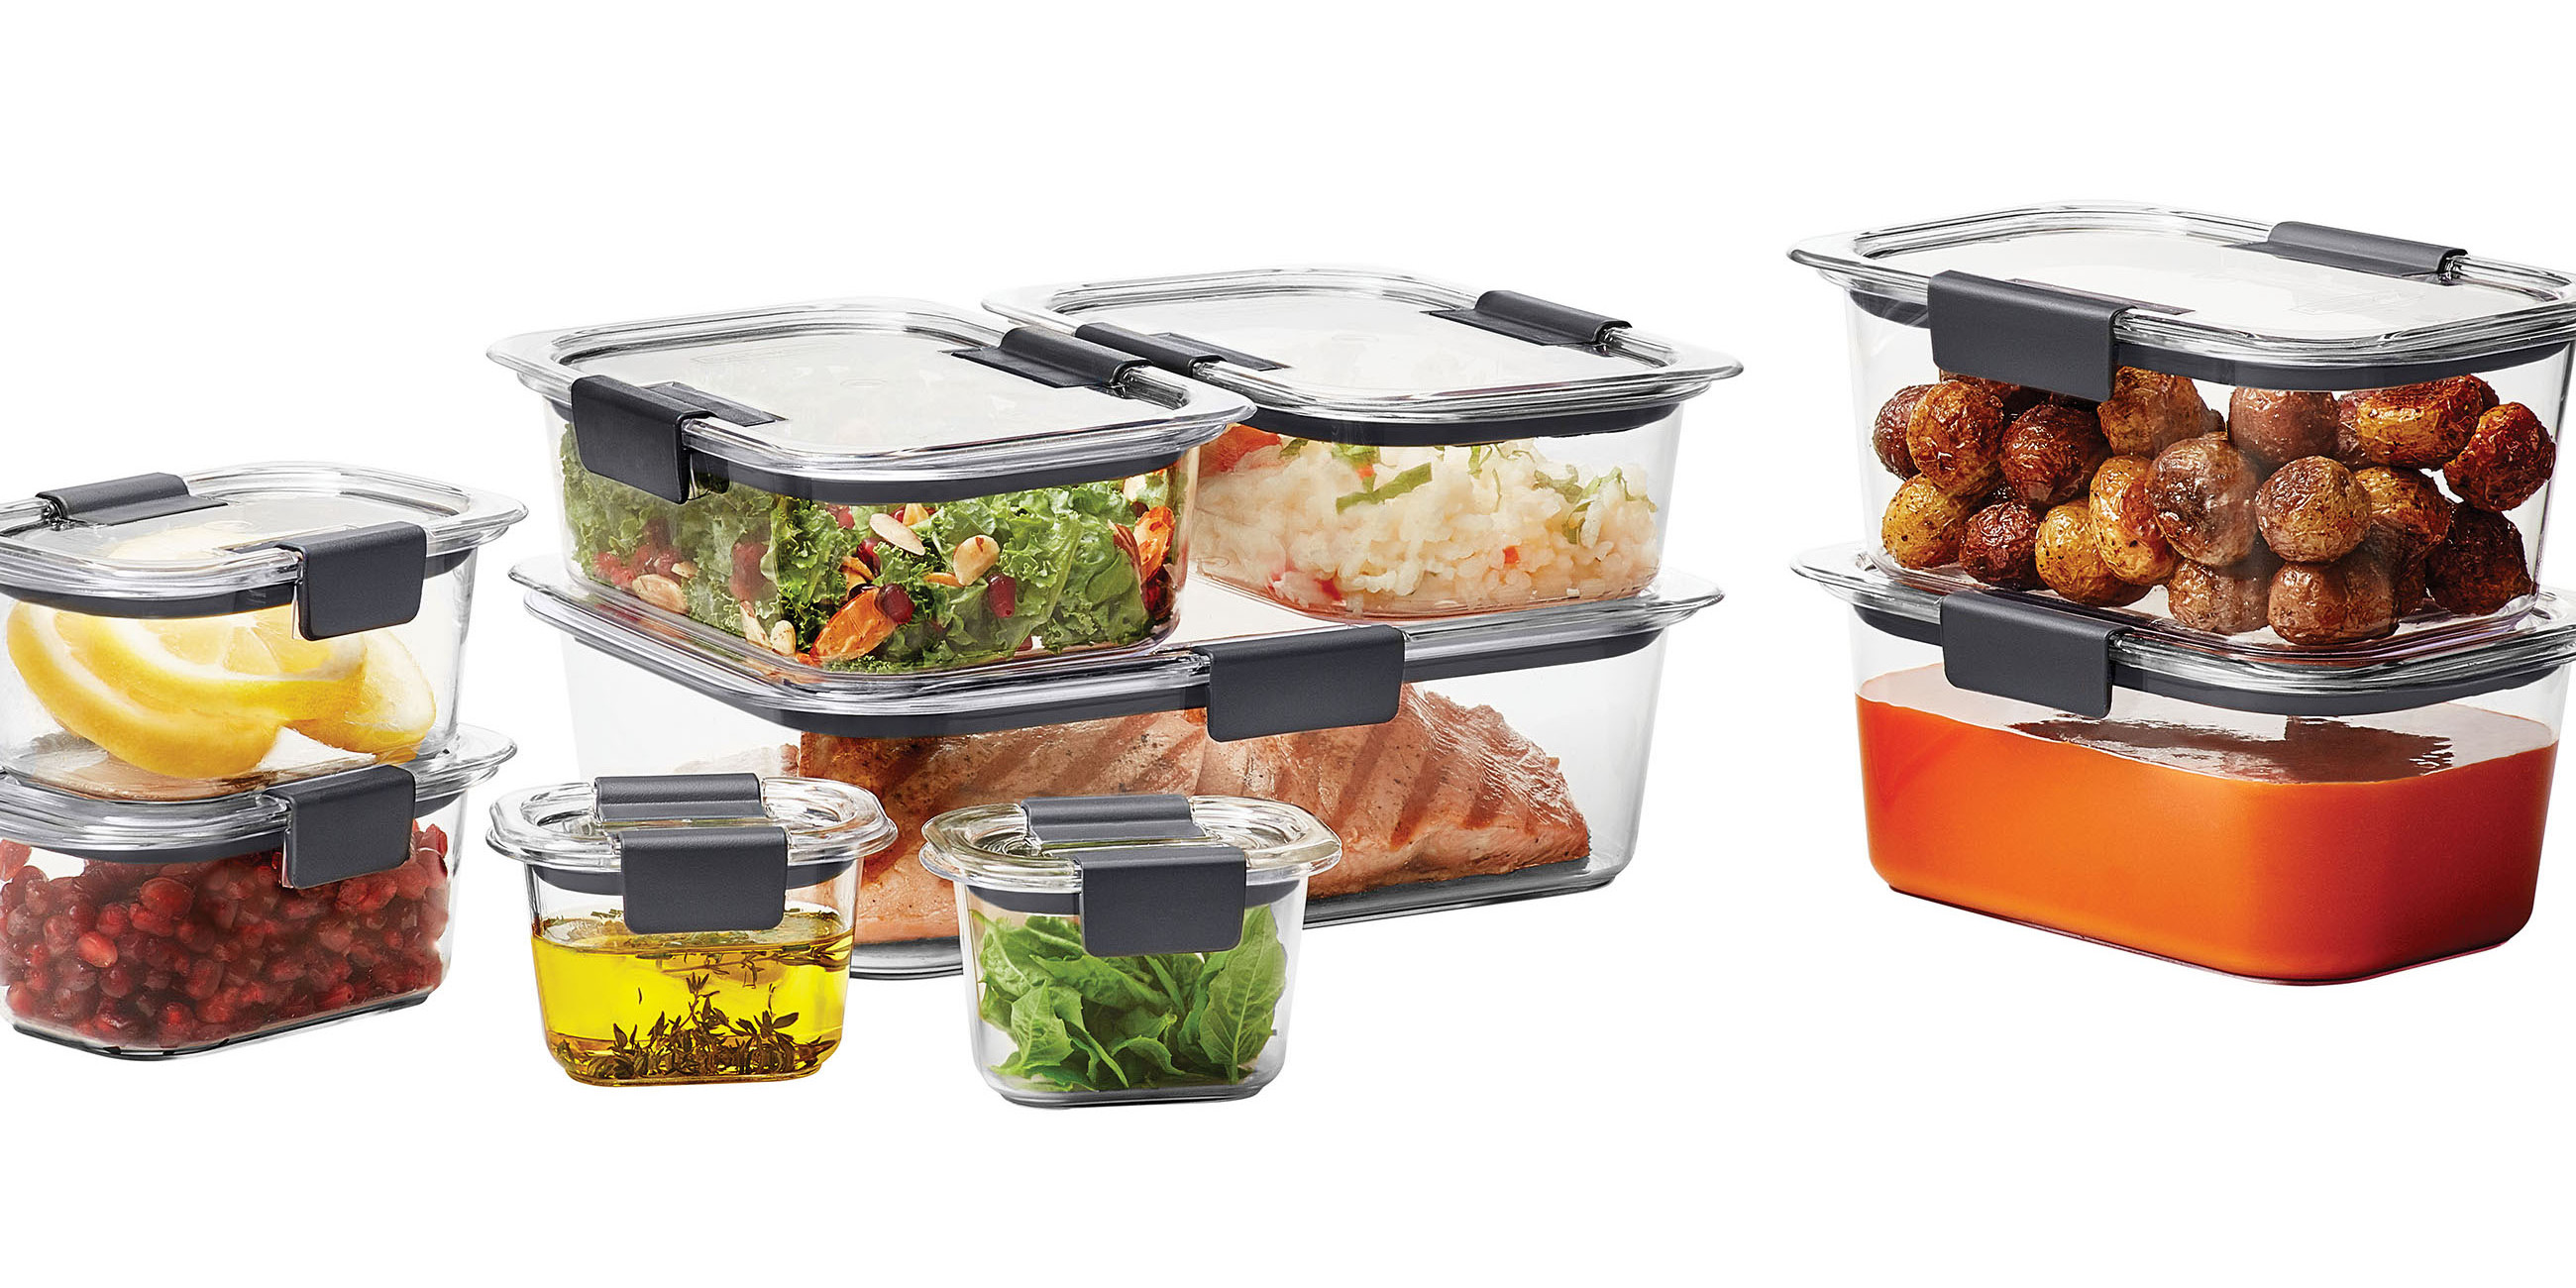 https://9to5toys.com/wp-content/uploads/sites/5/2019/05/18-piece-Rubbermaid-Brilliance-Food-Storage-Container-Set.jpeg